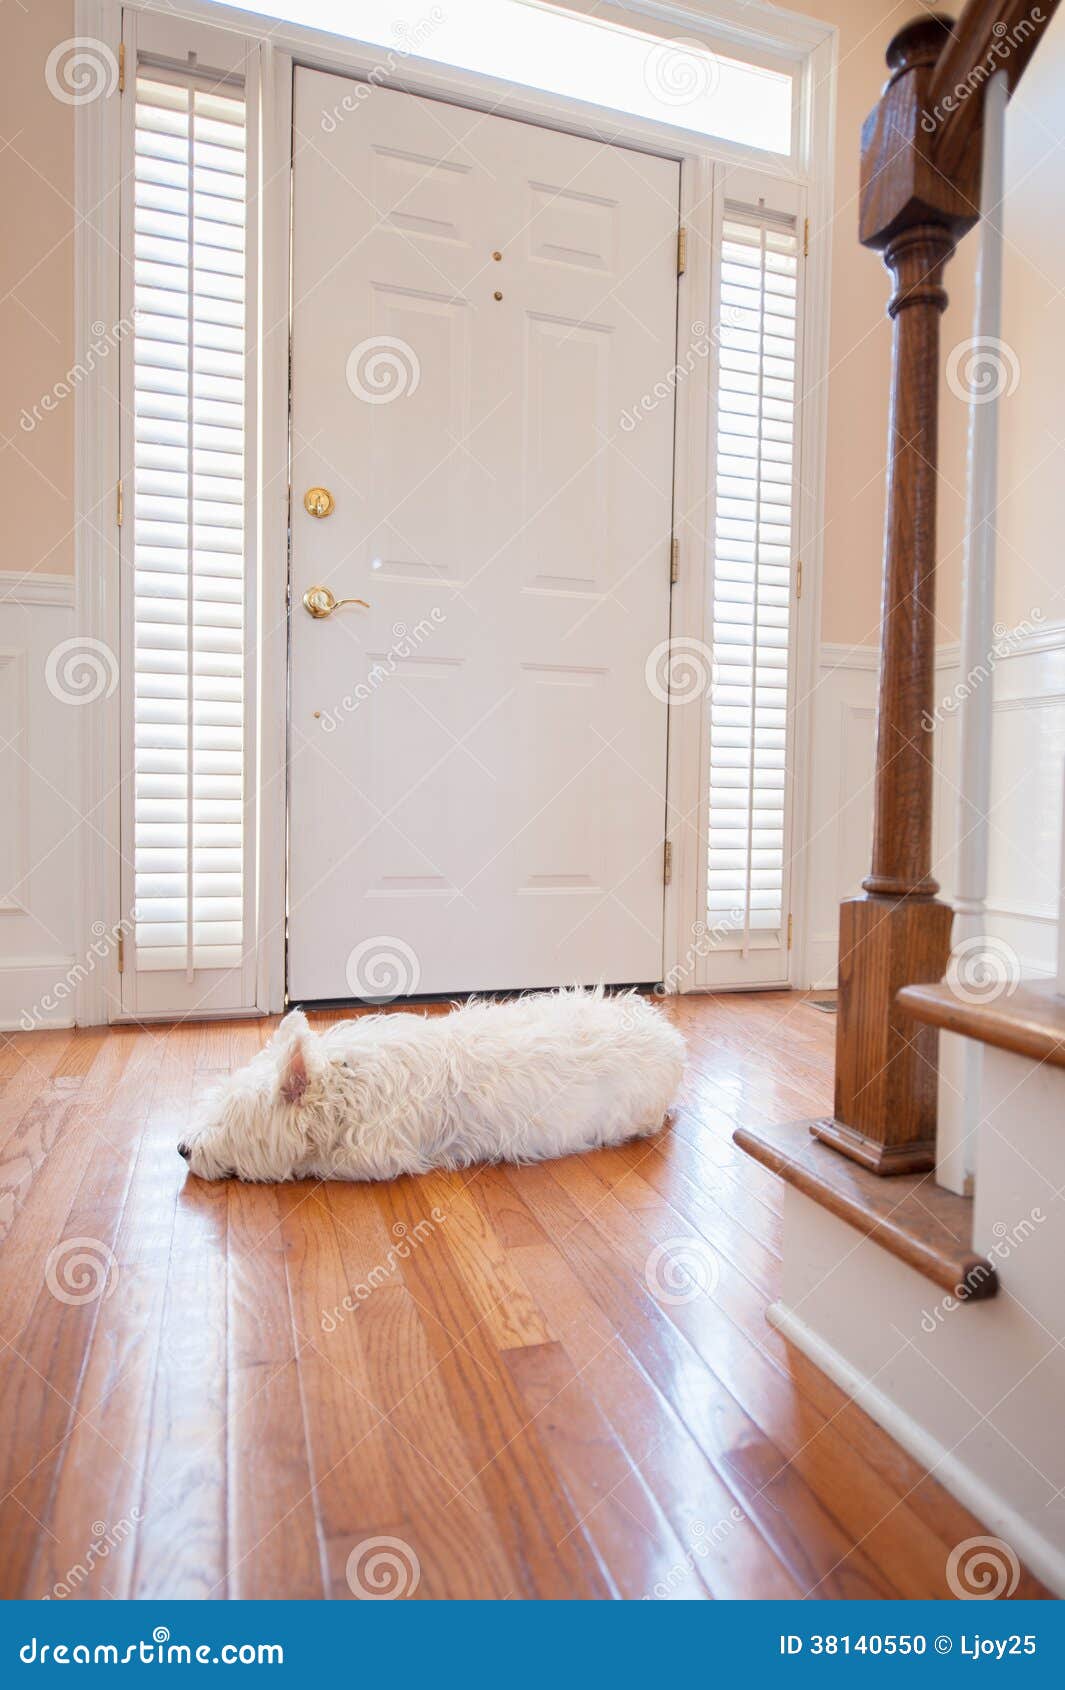 Dog waiting at the door stock photo. Image of building - 38140550